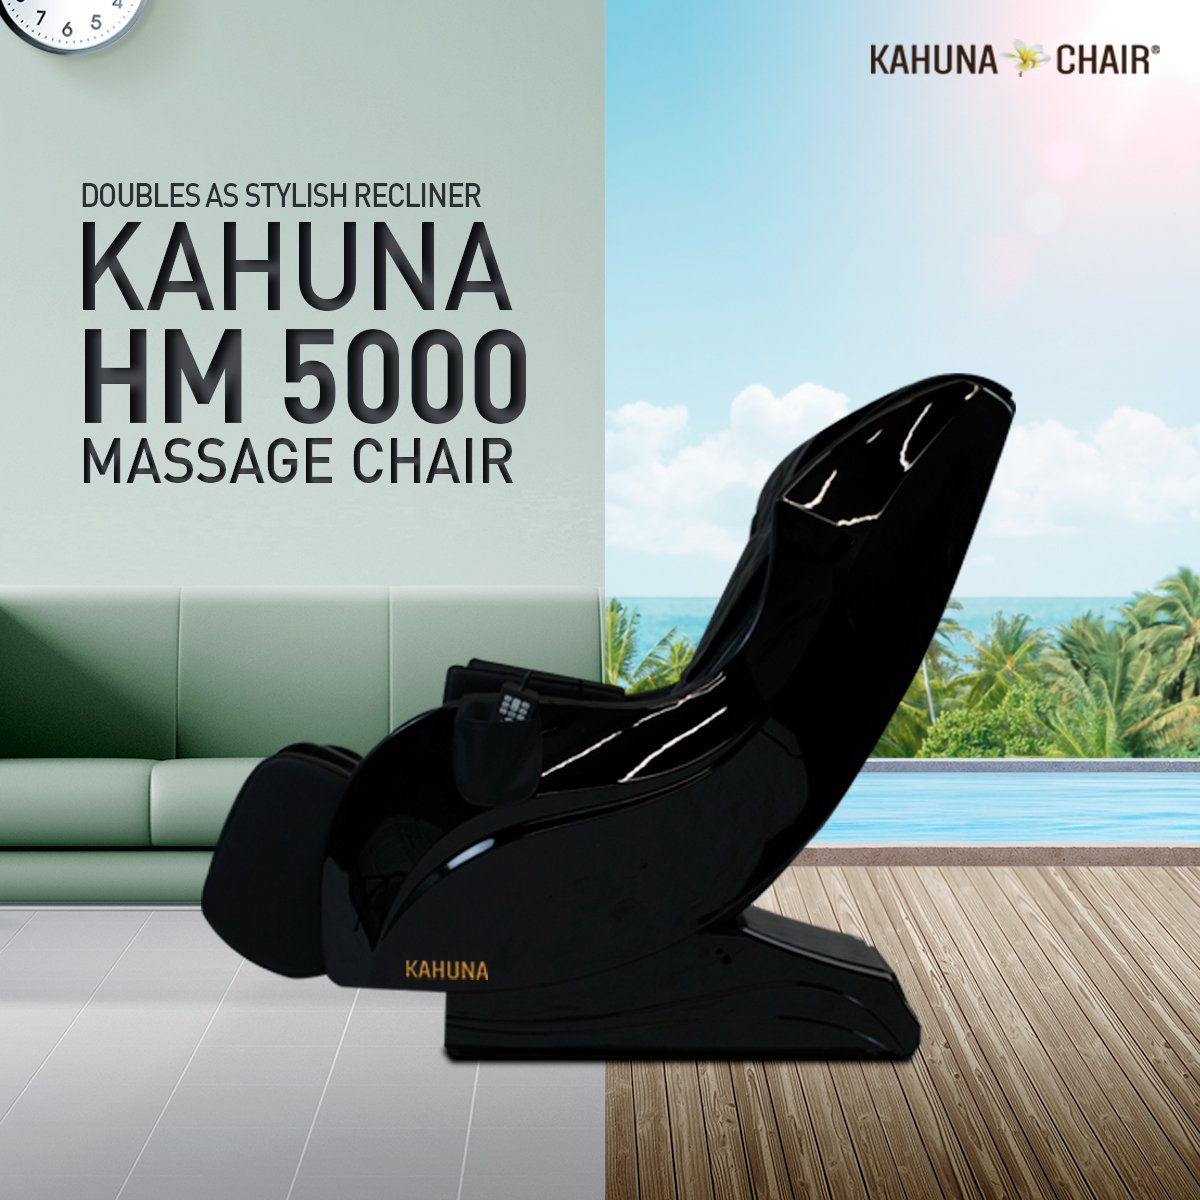 Kahuna Limitless Slender Double as Stylish Recliner Massage Chair